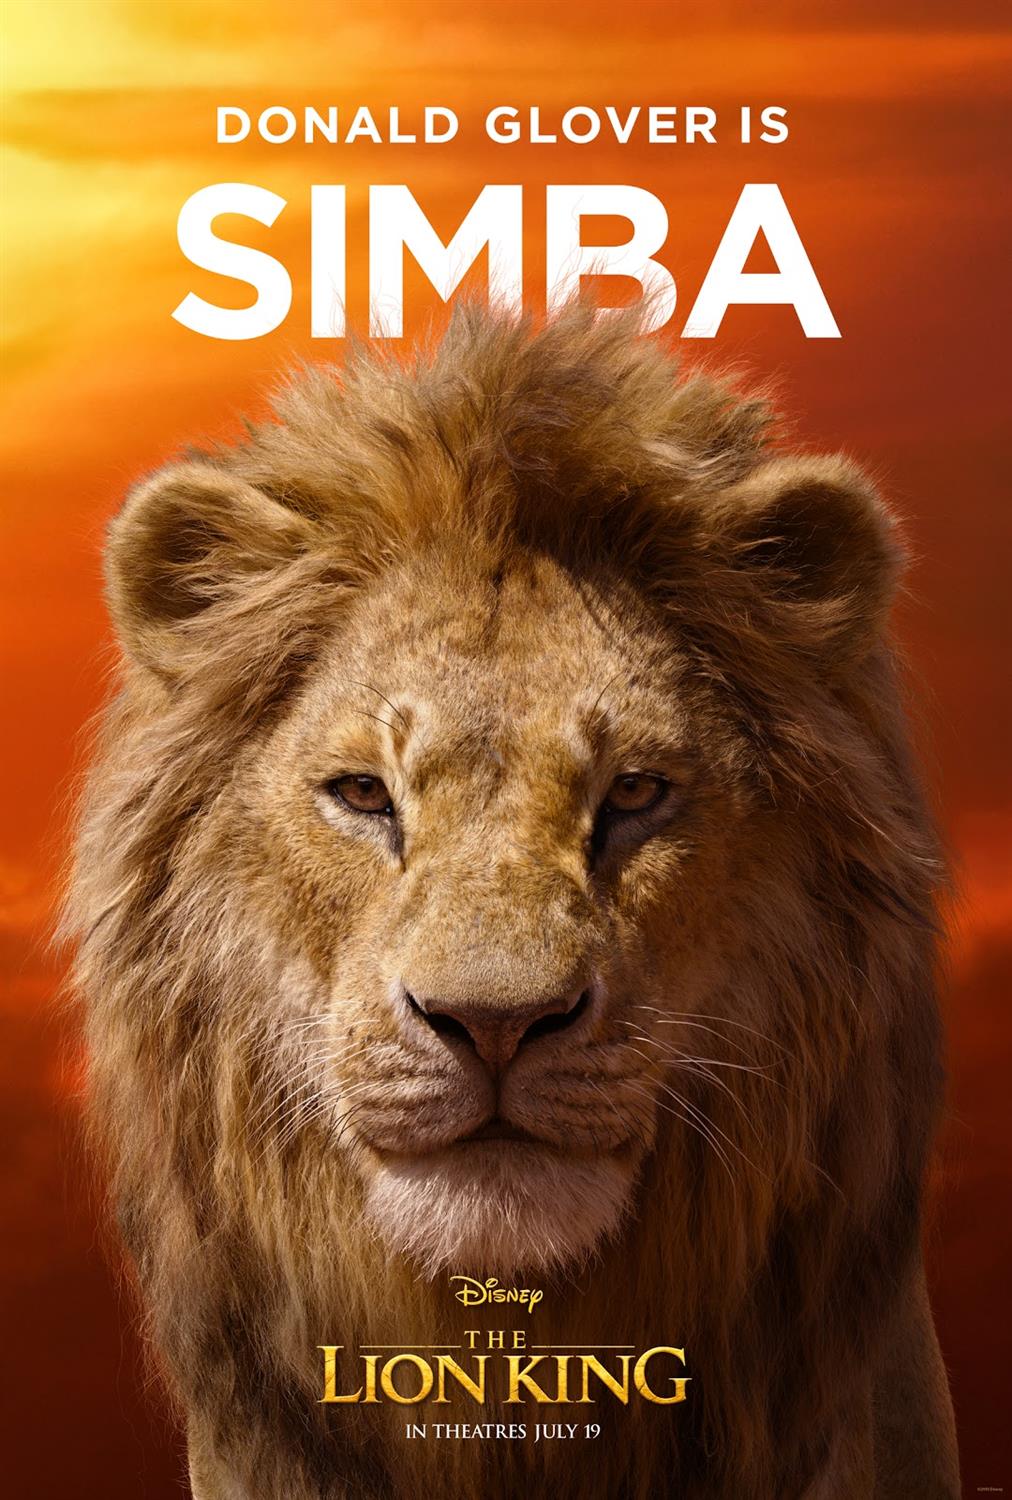 Disney Debuts 11 Gorgeous Character Posters for "The Lion King"